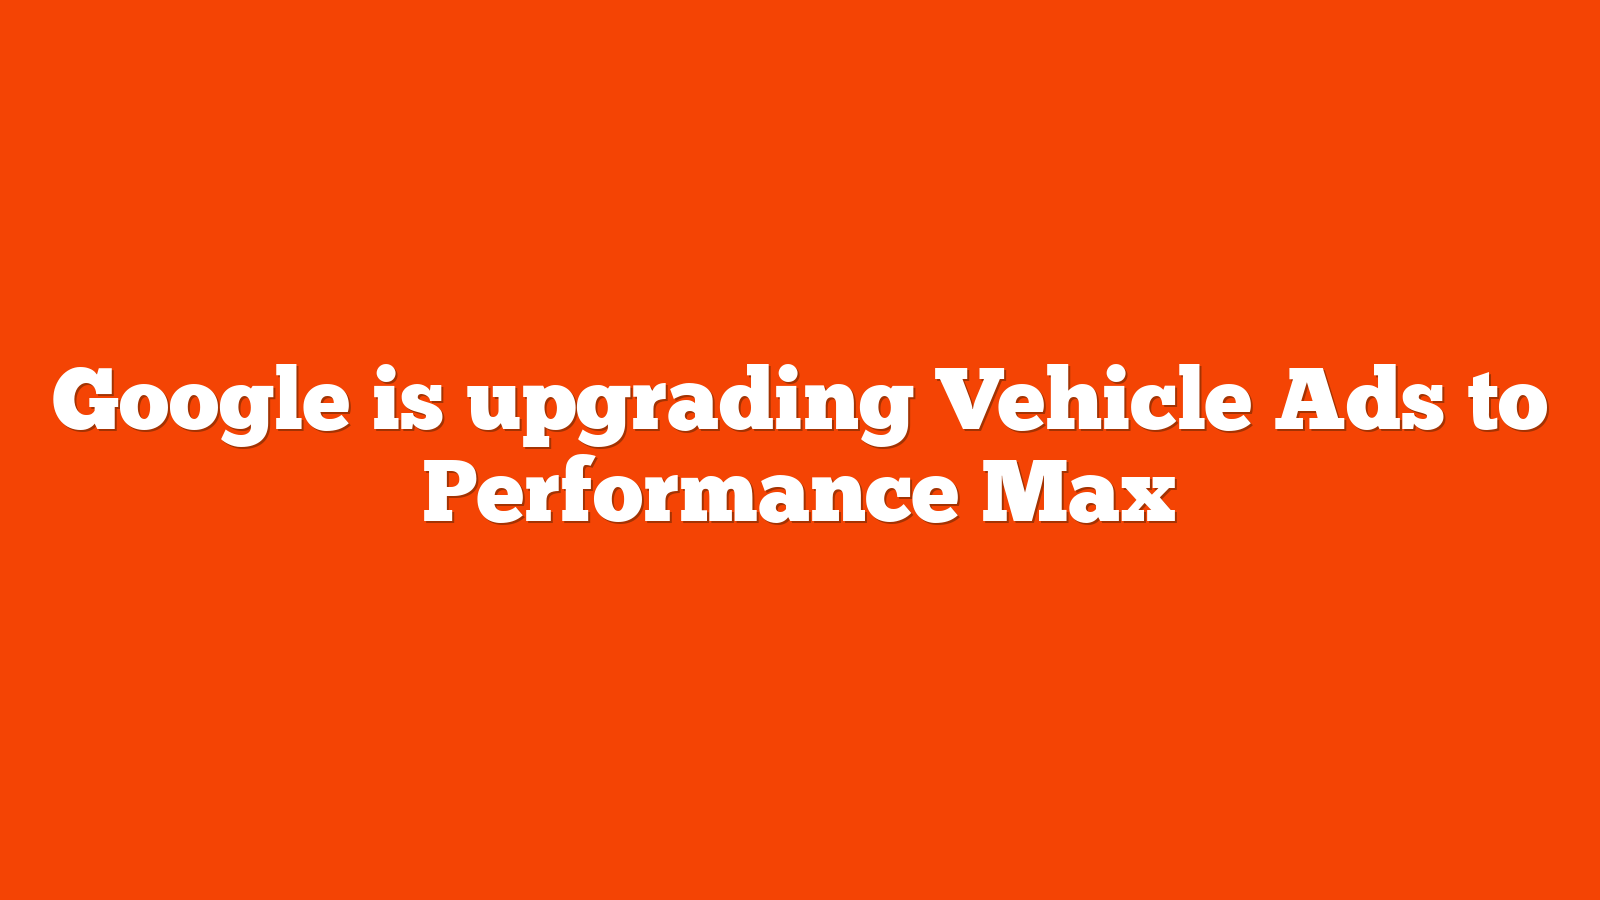 Google is upgrading Vehicle Ads to Performance Max